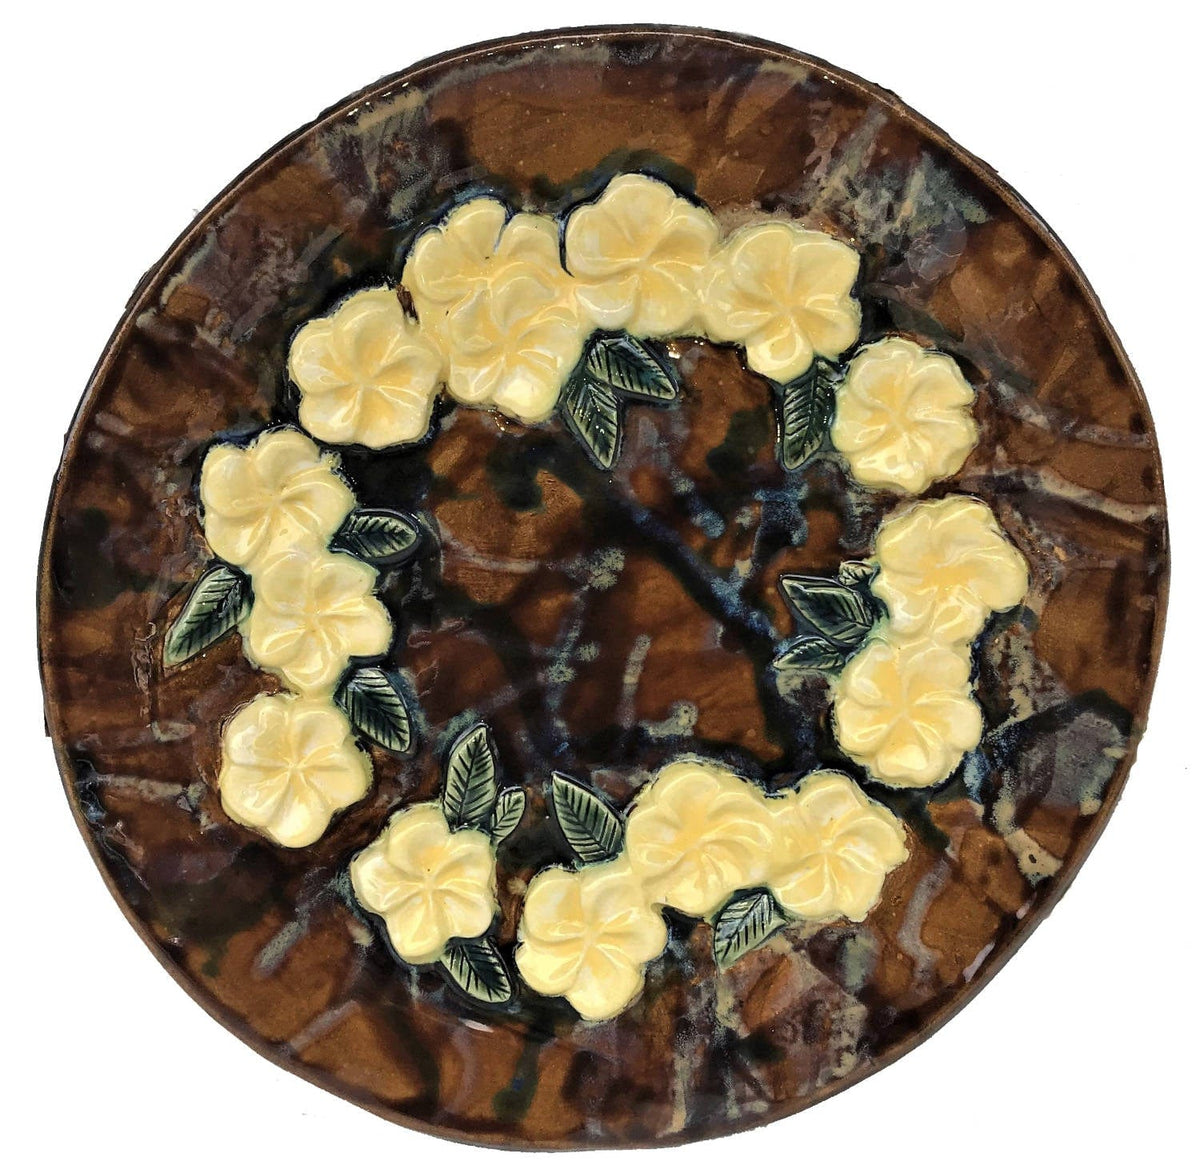 Ceramic Designs by Albert Bowls Plaques Our circular Hawaiian Plumeria Flower Wall Plaque with Browns and Yellows